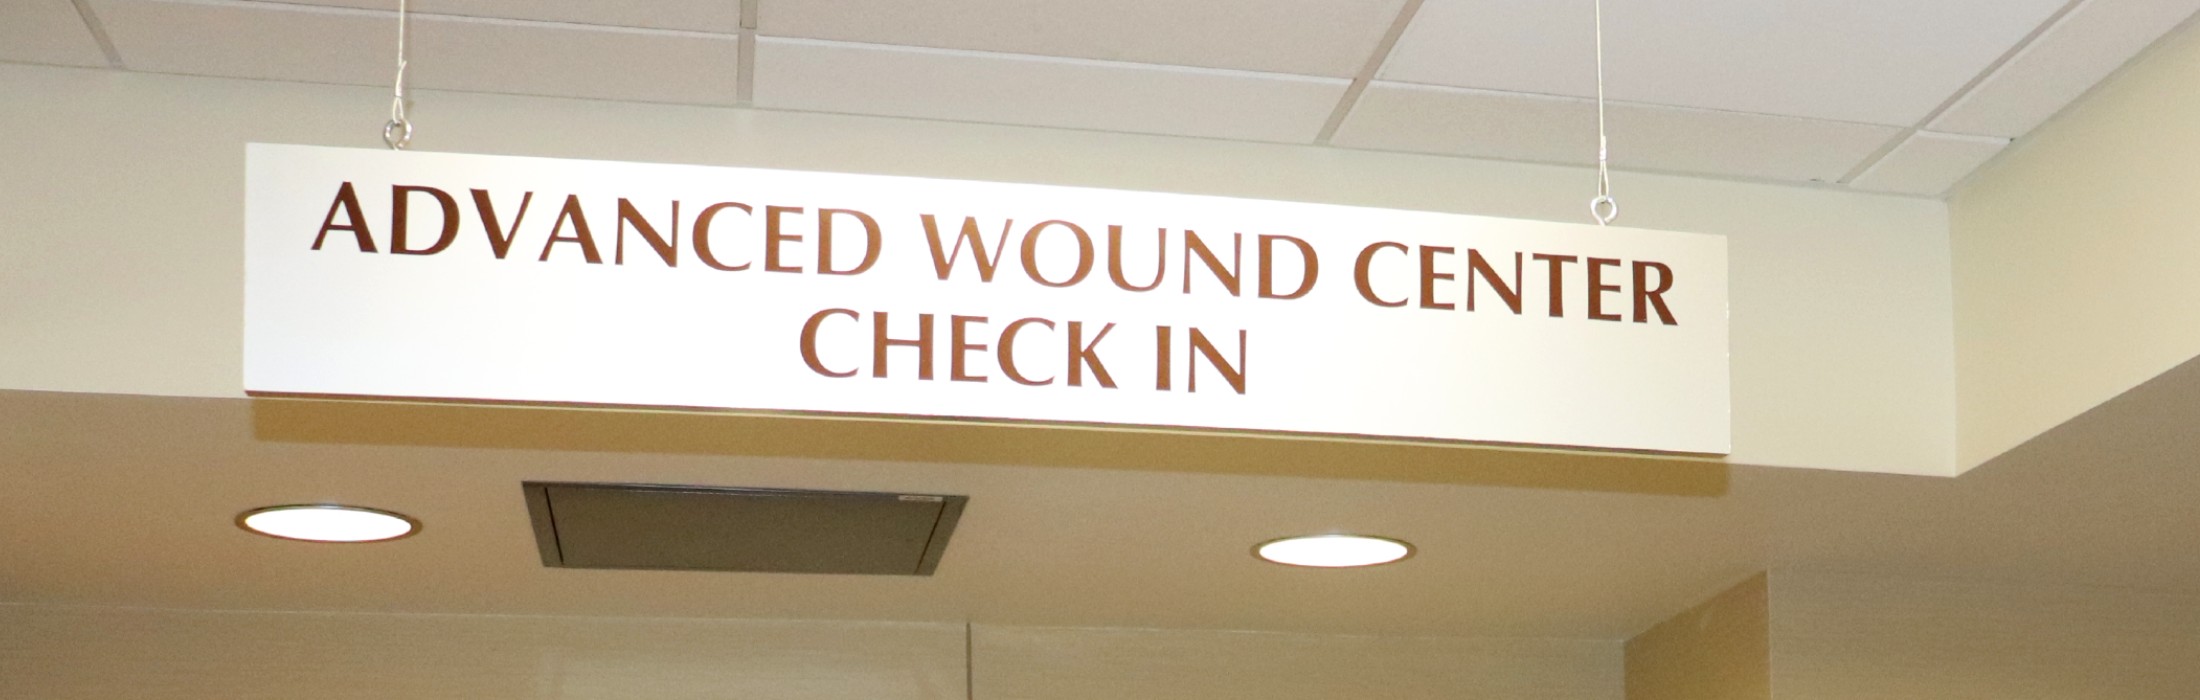 Check-in at the Advanced Wound Center at Western Missouri Medical Center